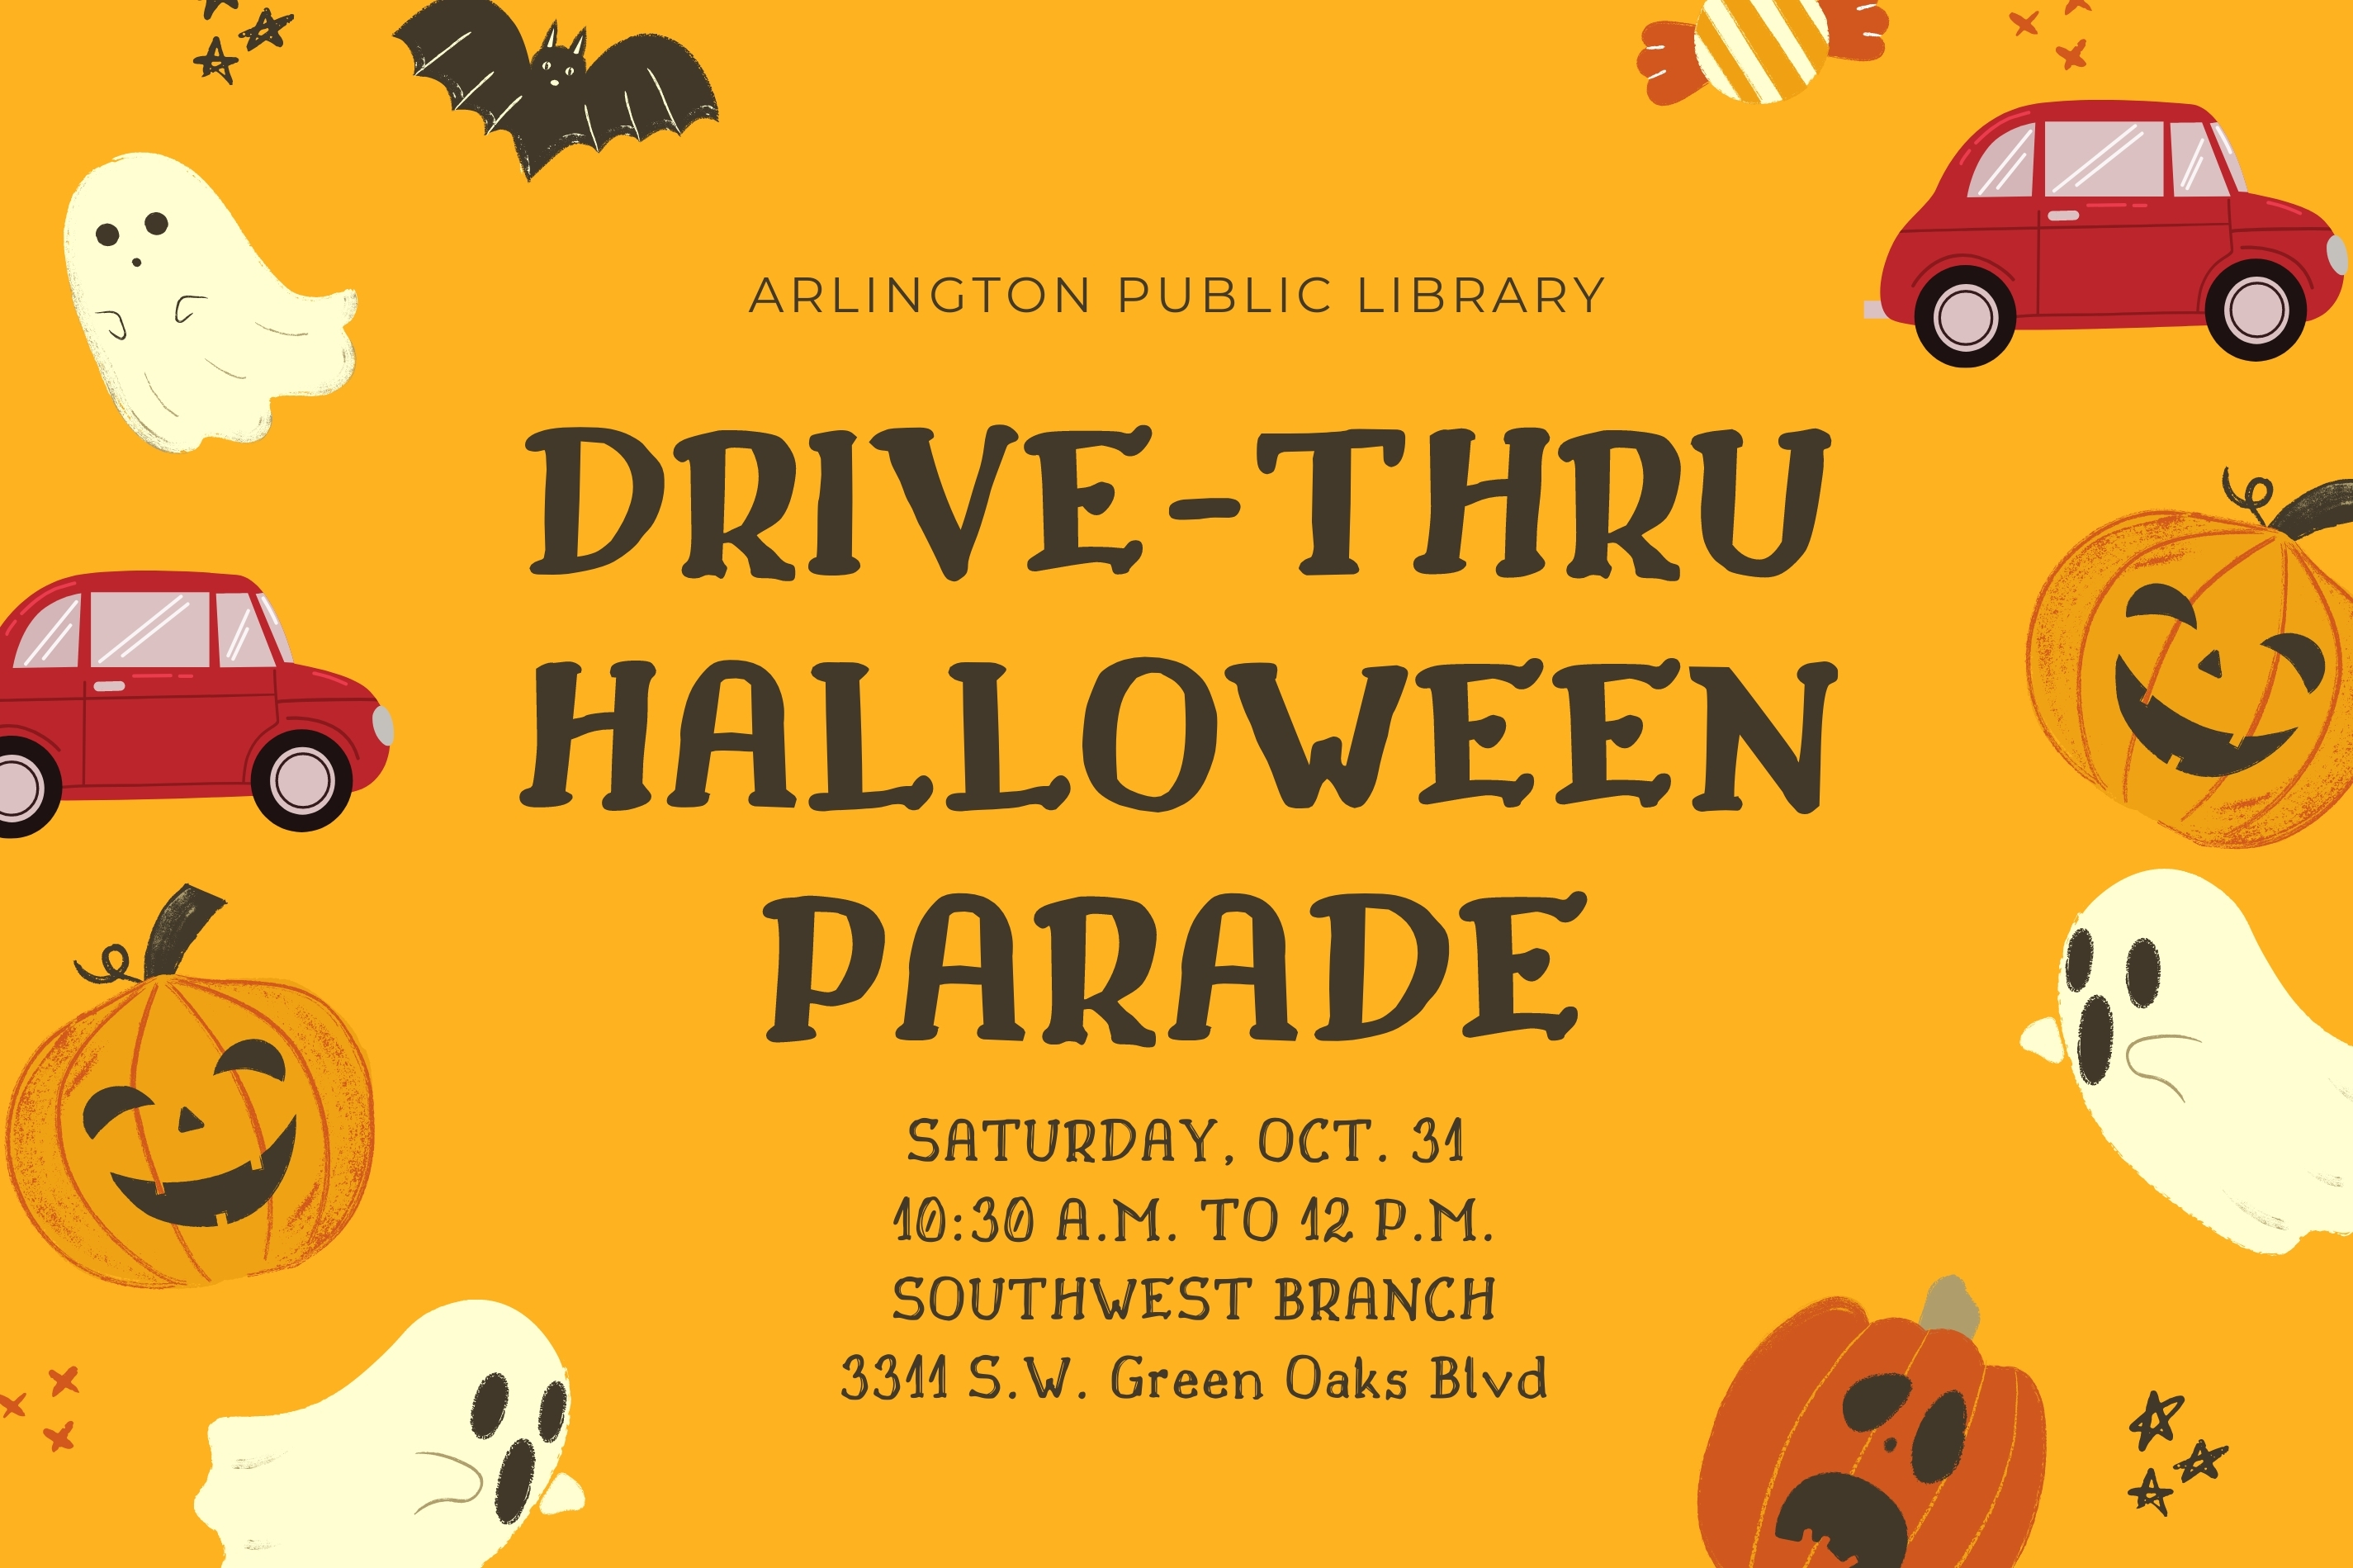 Have a Fa-boo-lous Halloween with Drive-Thru Parade